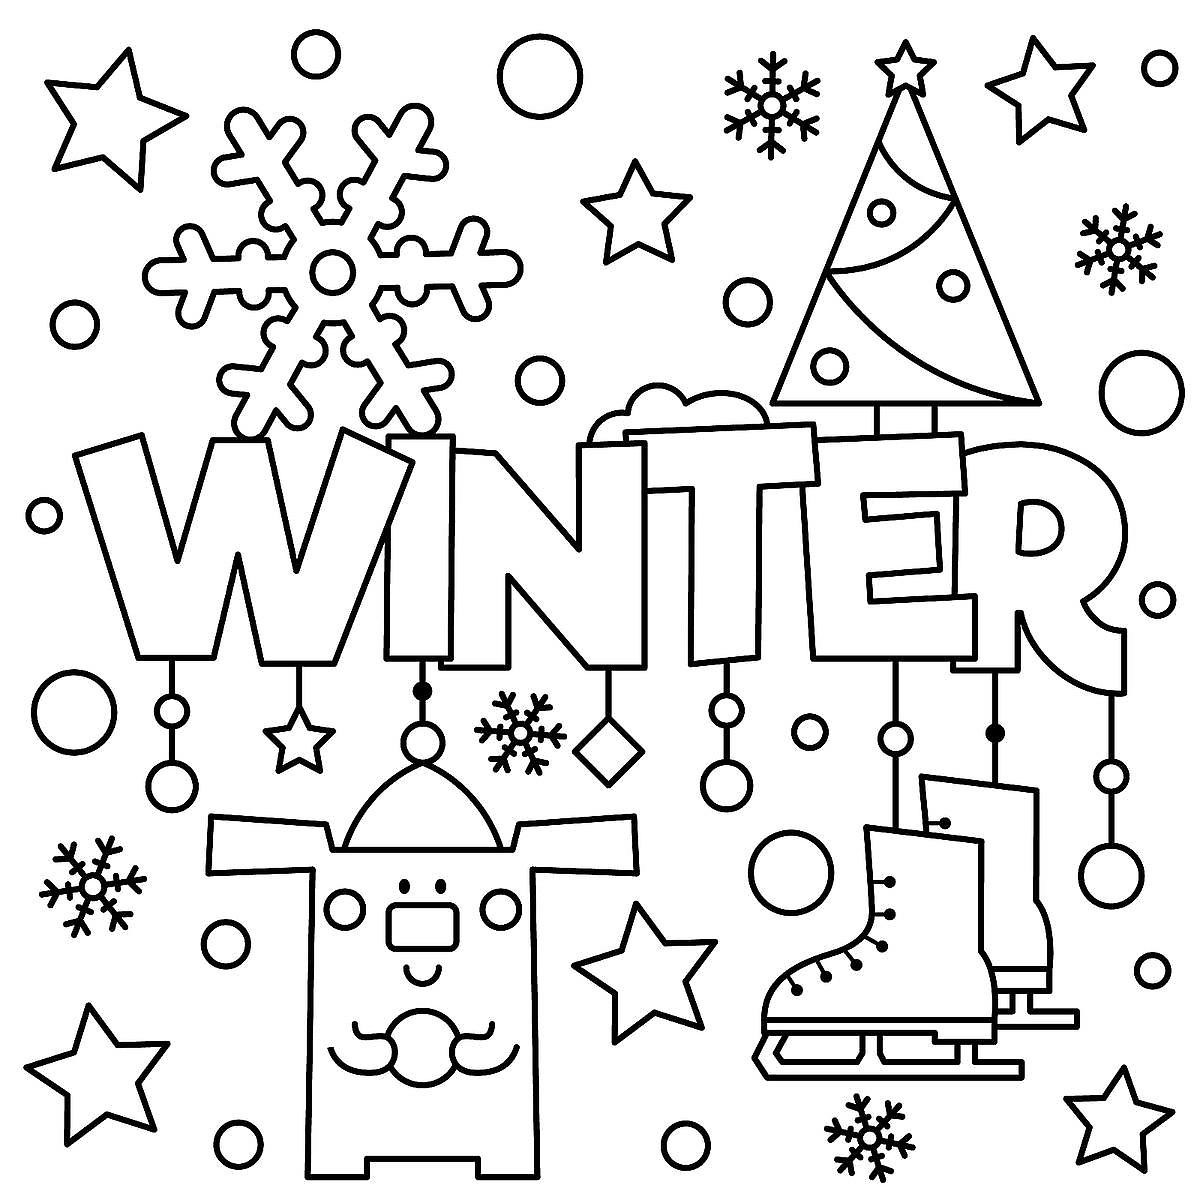 Kids Coloring Pages Winter
 Winter Puzzle & Coloring Pages Printable Winter Themed